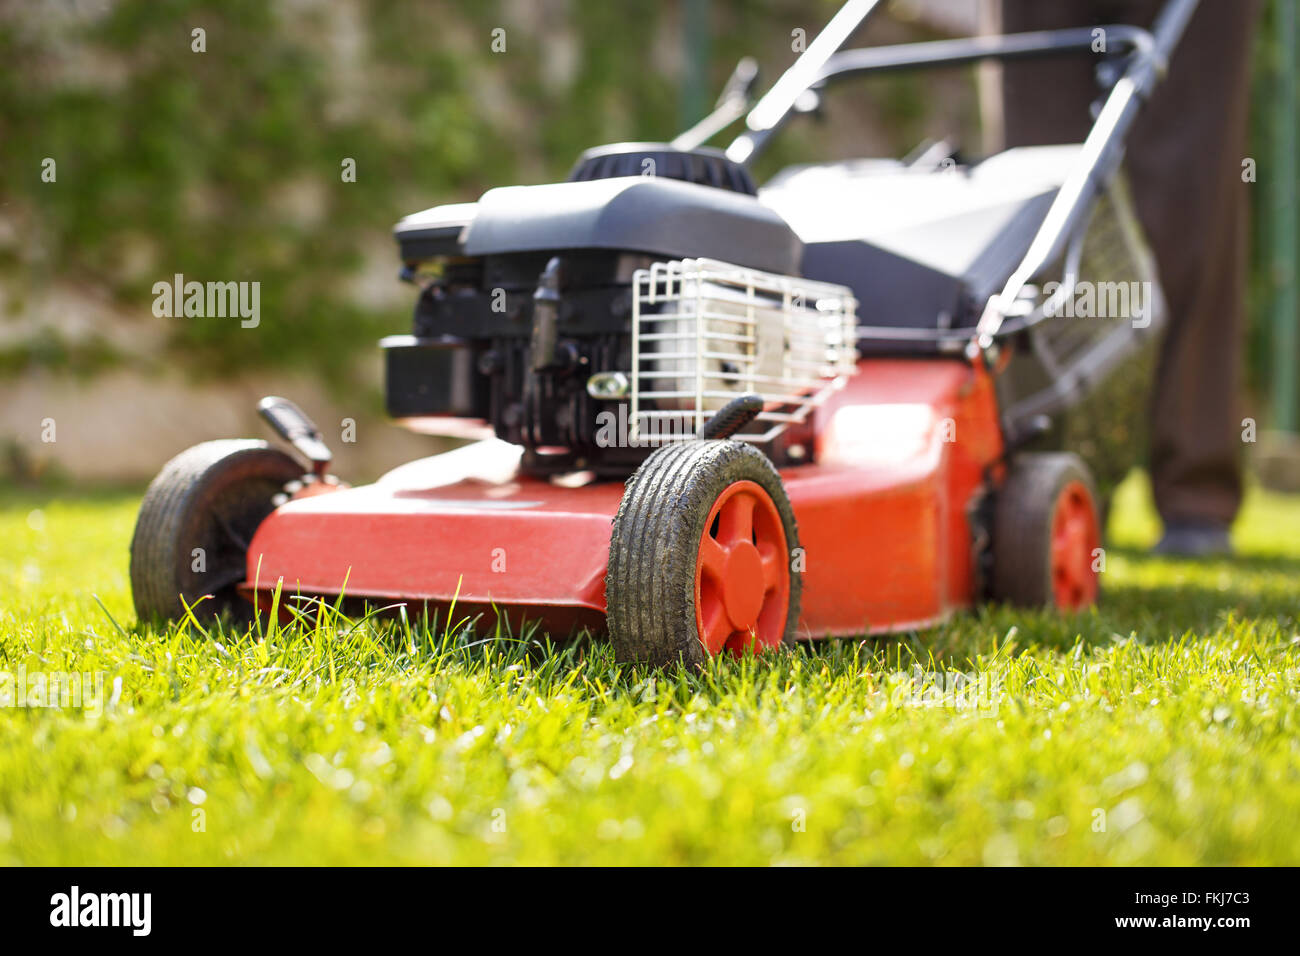 Man cut grass with lawnmower at backyard closeup, outdoor works Stock Photo